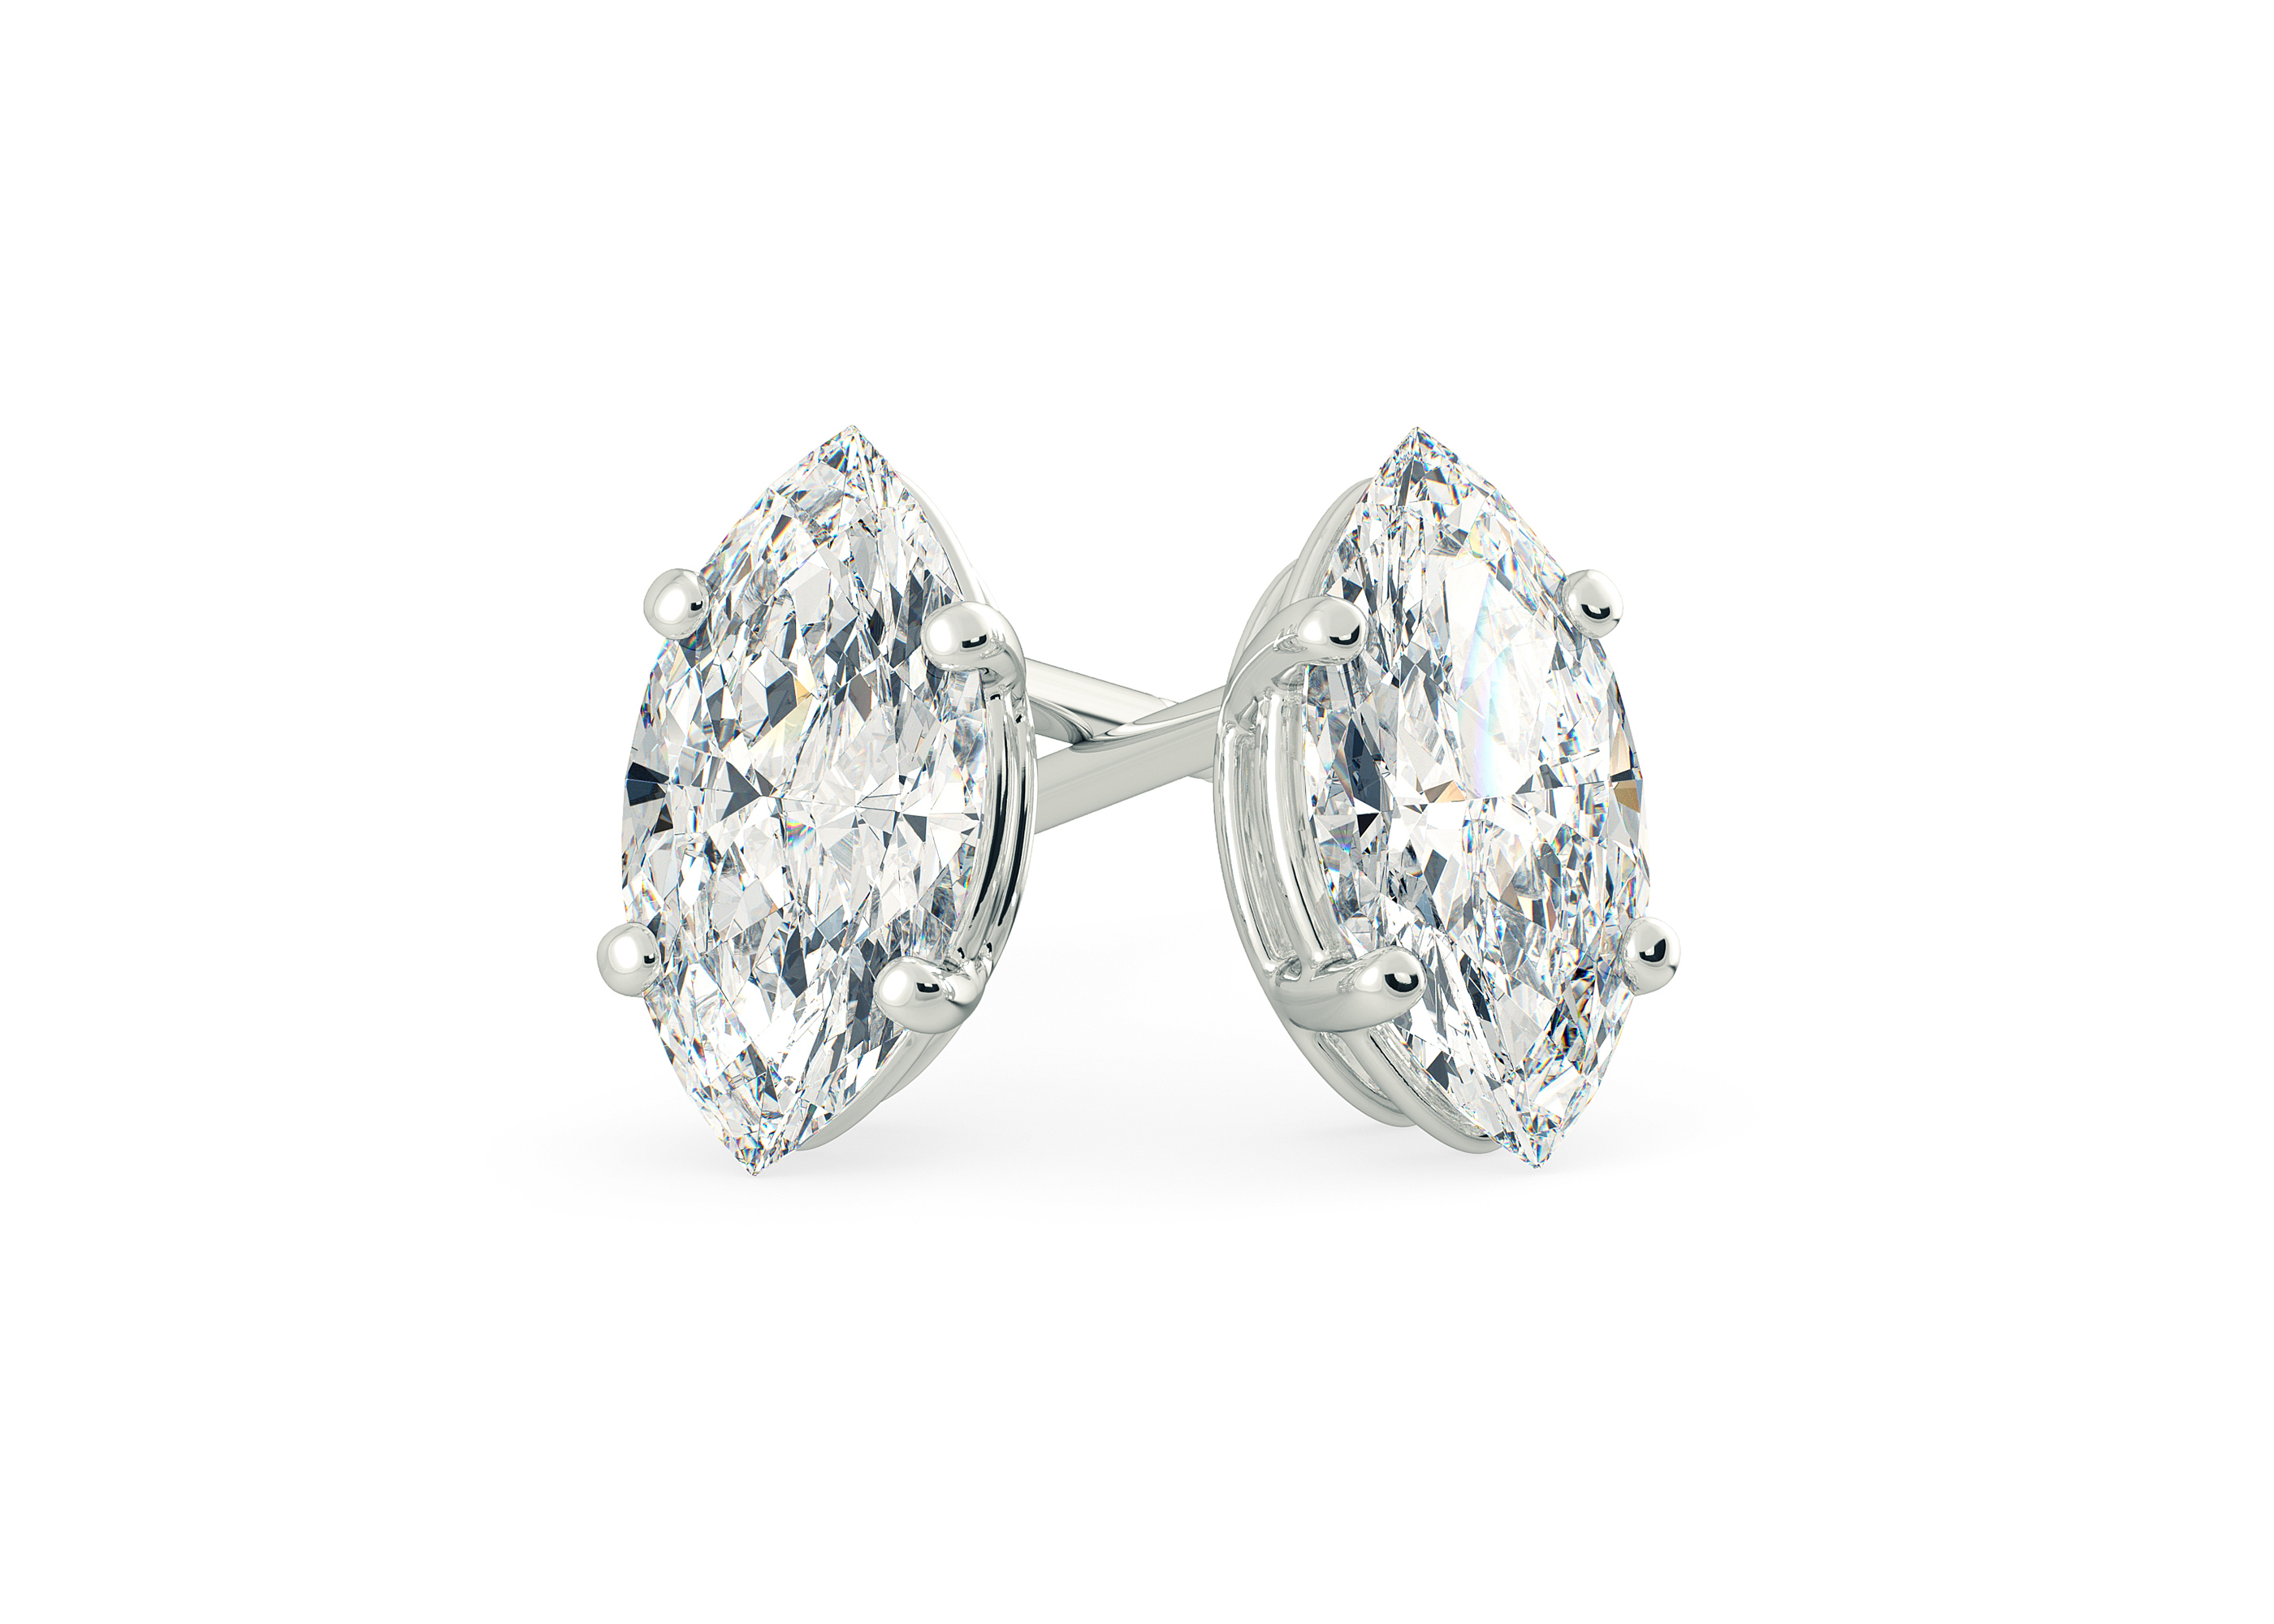 One Carat Marquise Diamond Stud Earrings in 9K White Gold